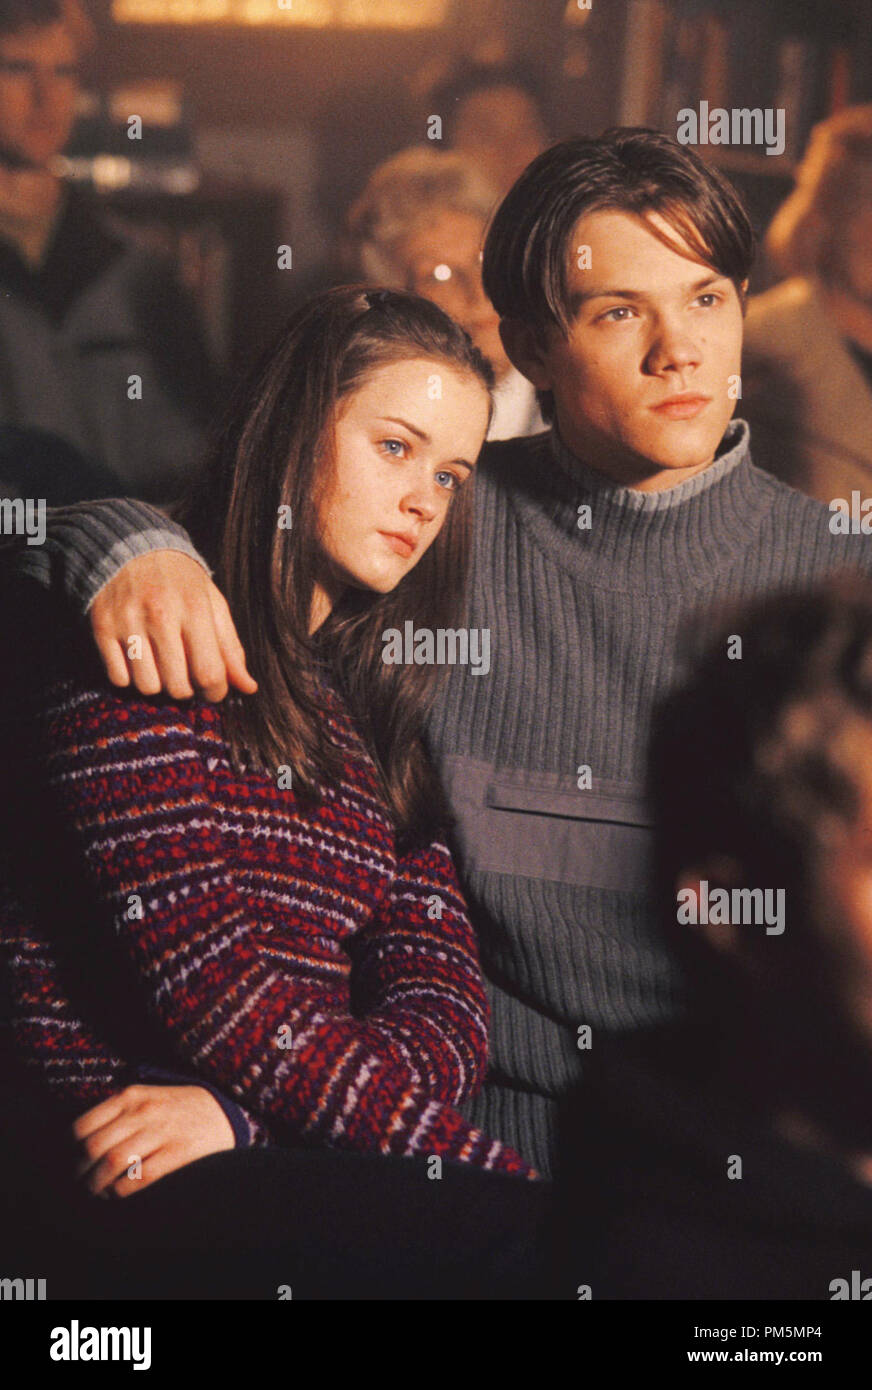 Dated who has alexis bledel 'Gilmore Girls':